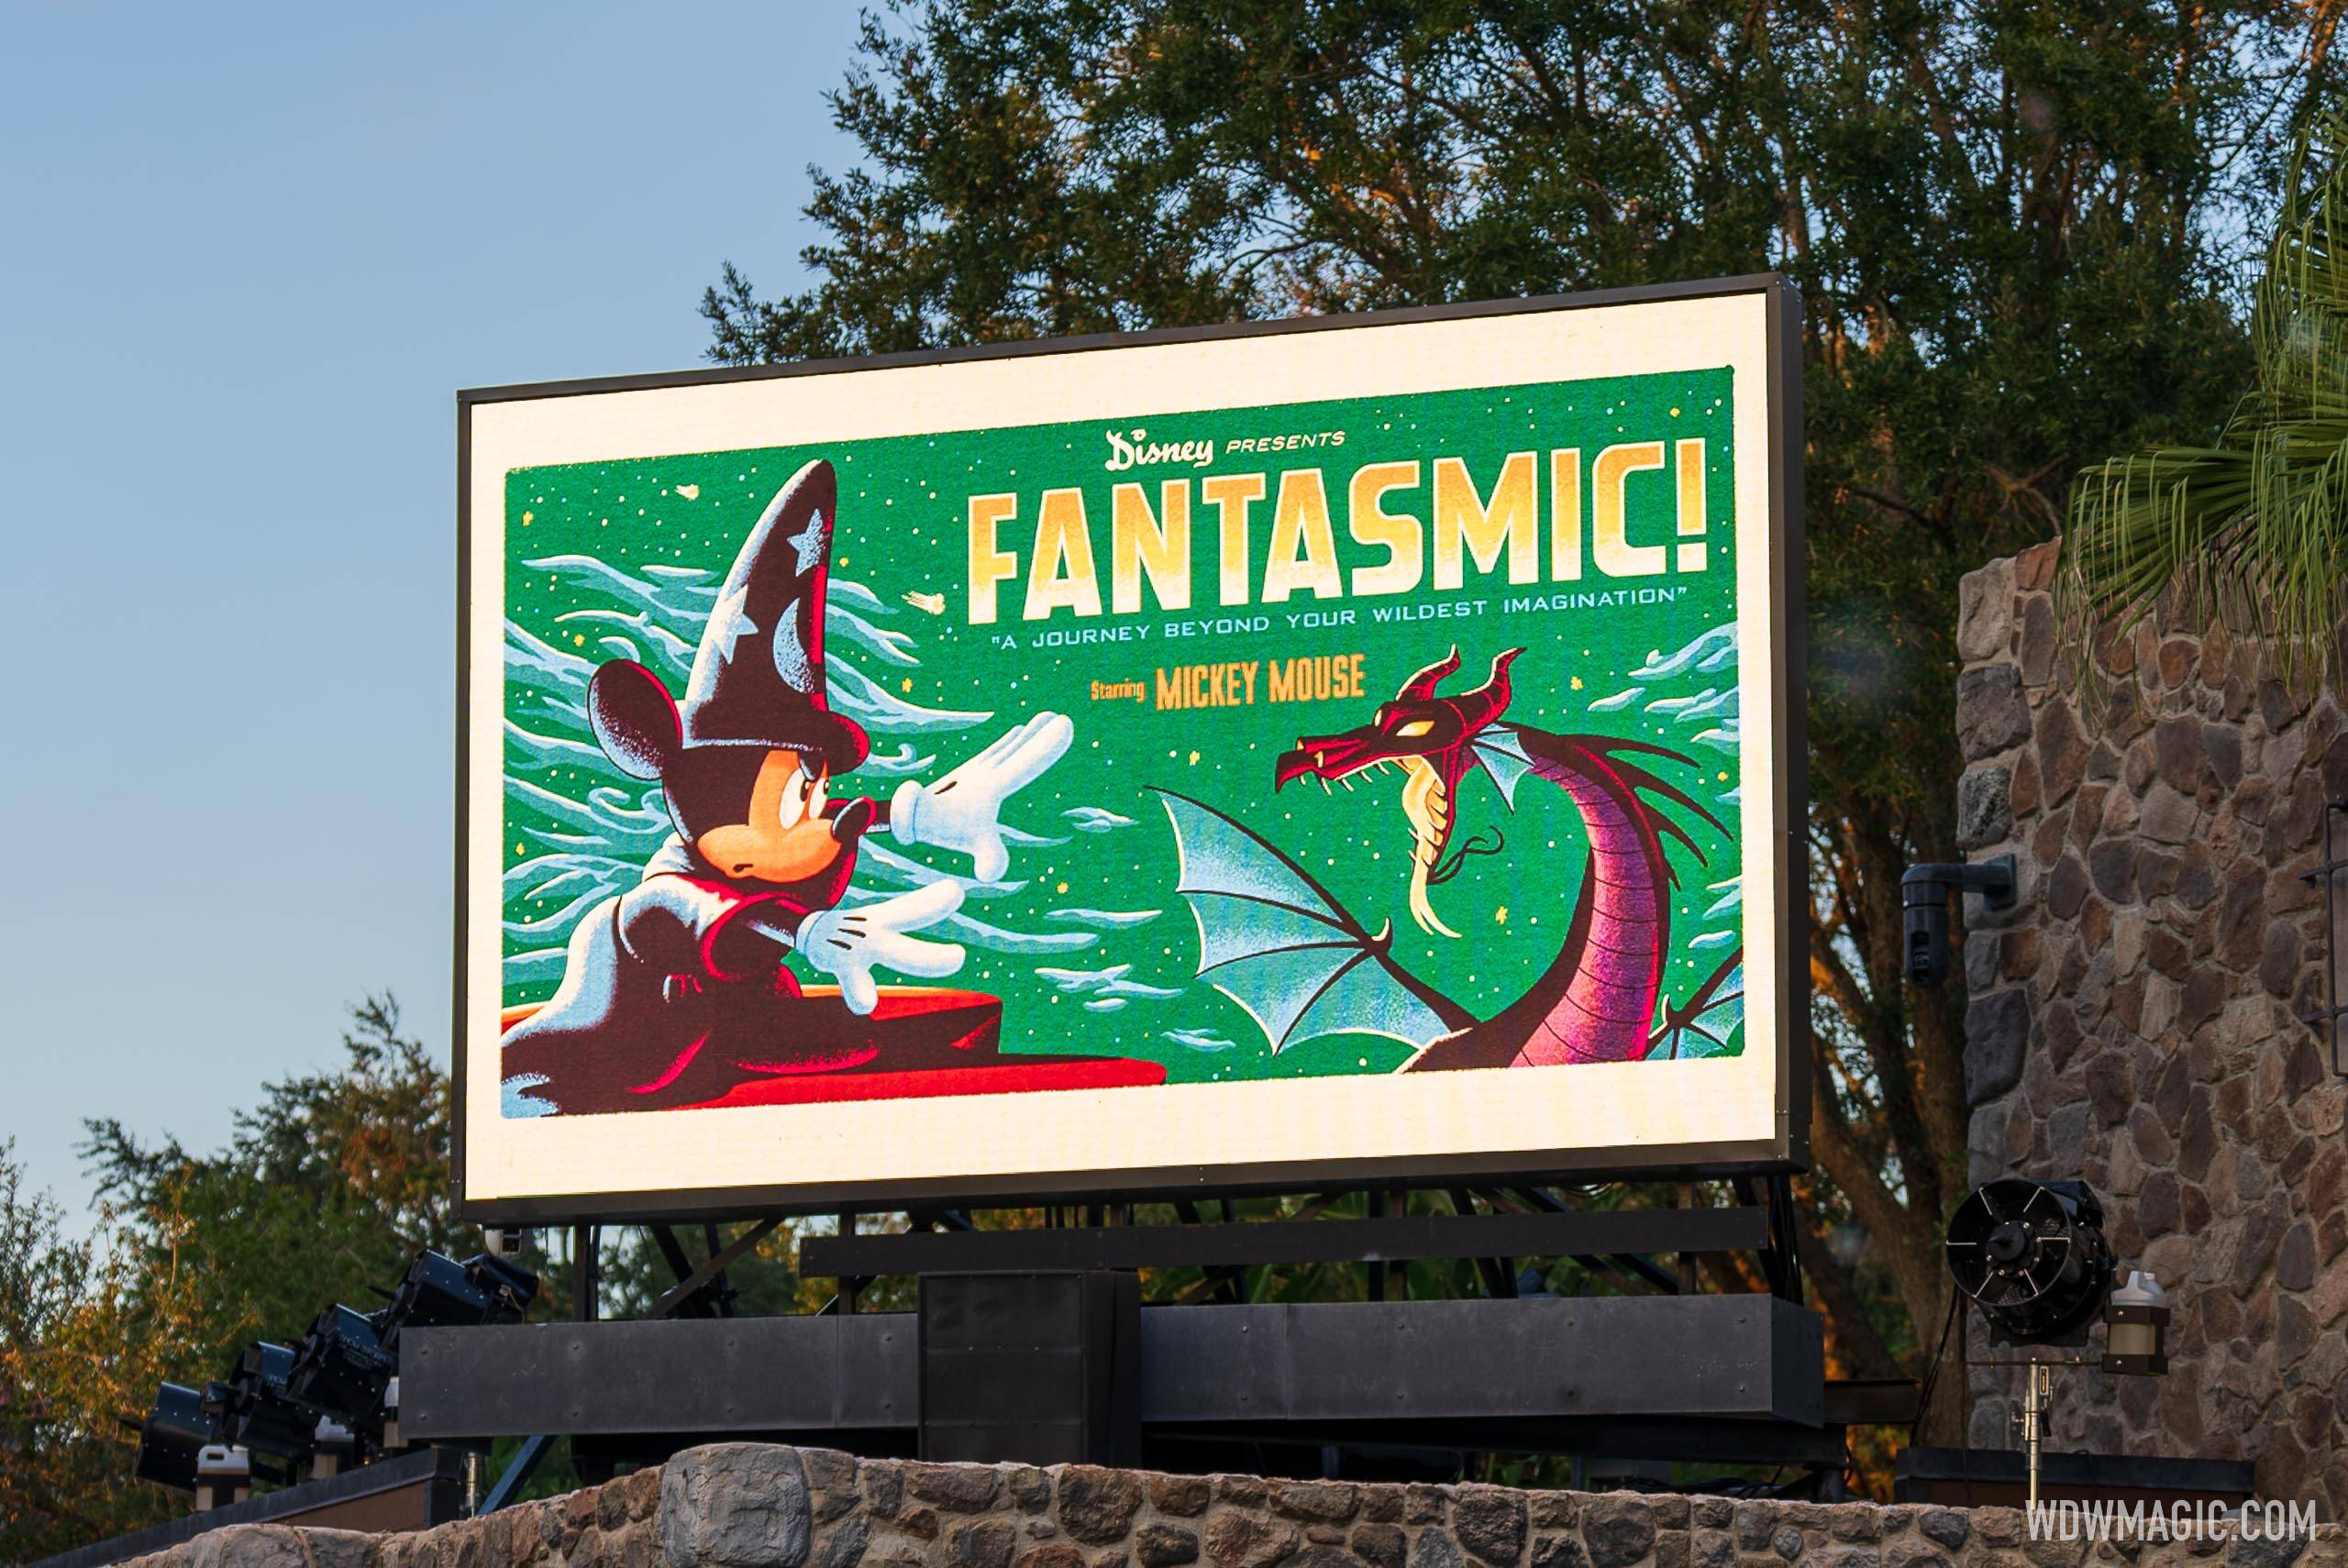 Fantasmic! Dining Packages range in price from $51 to $77